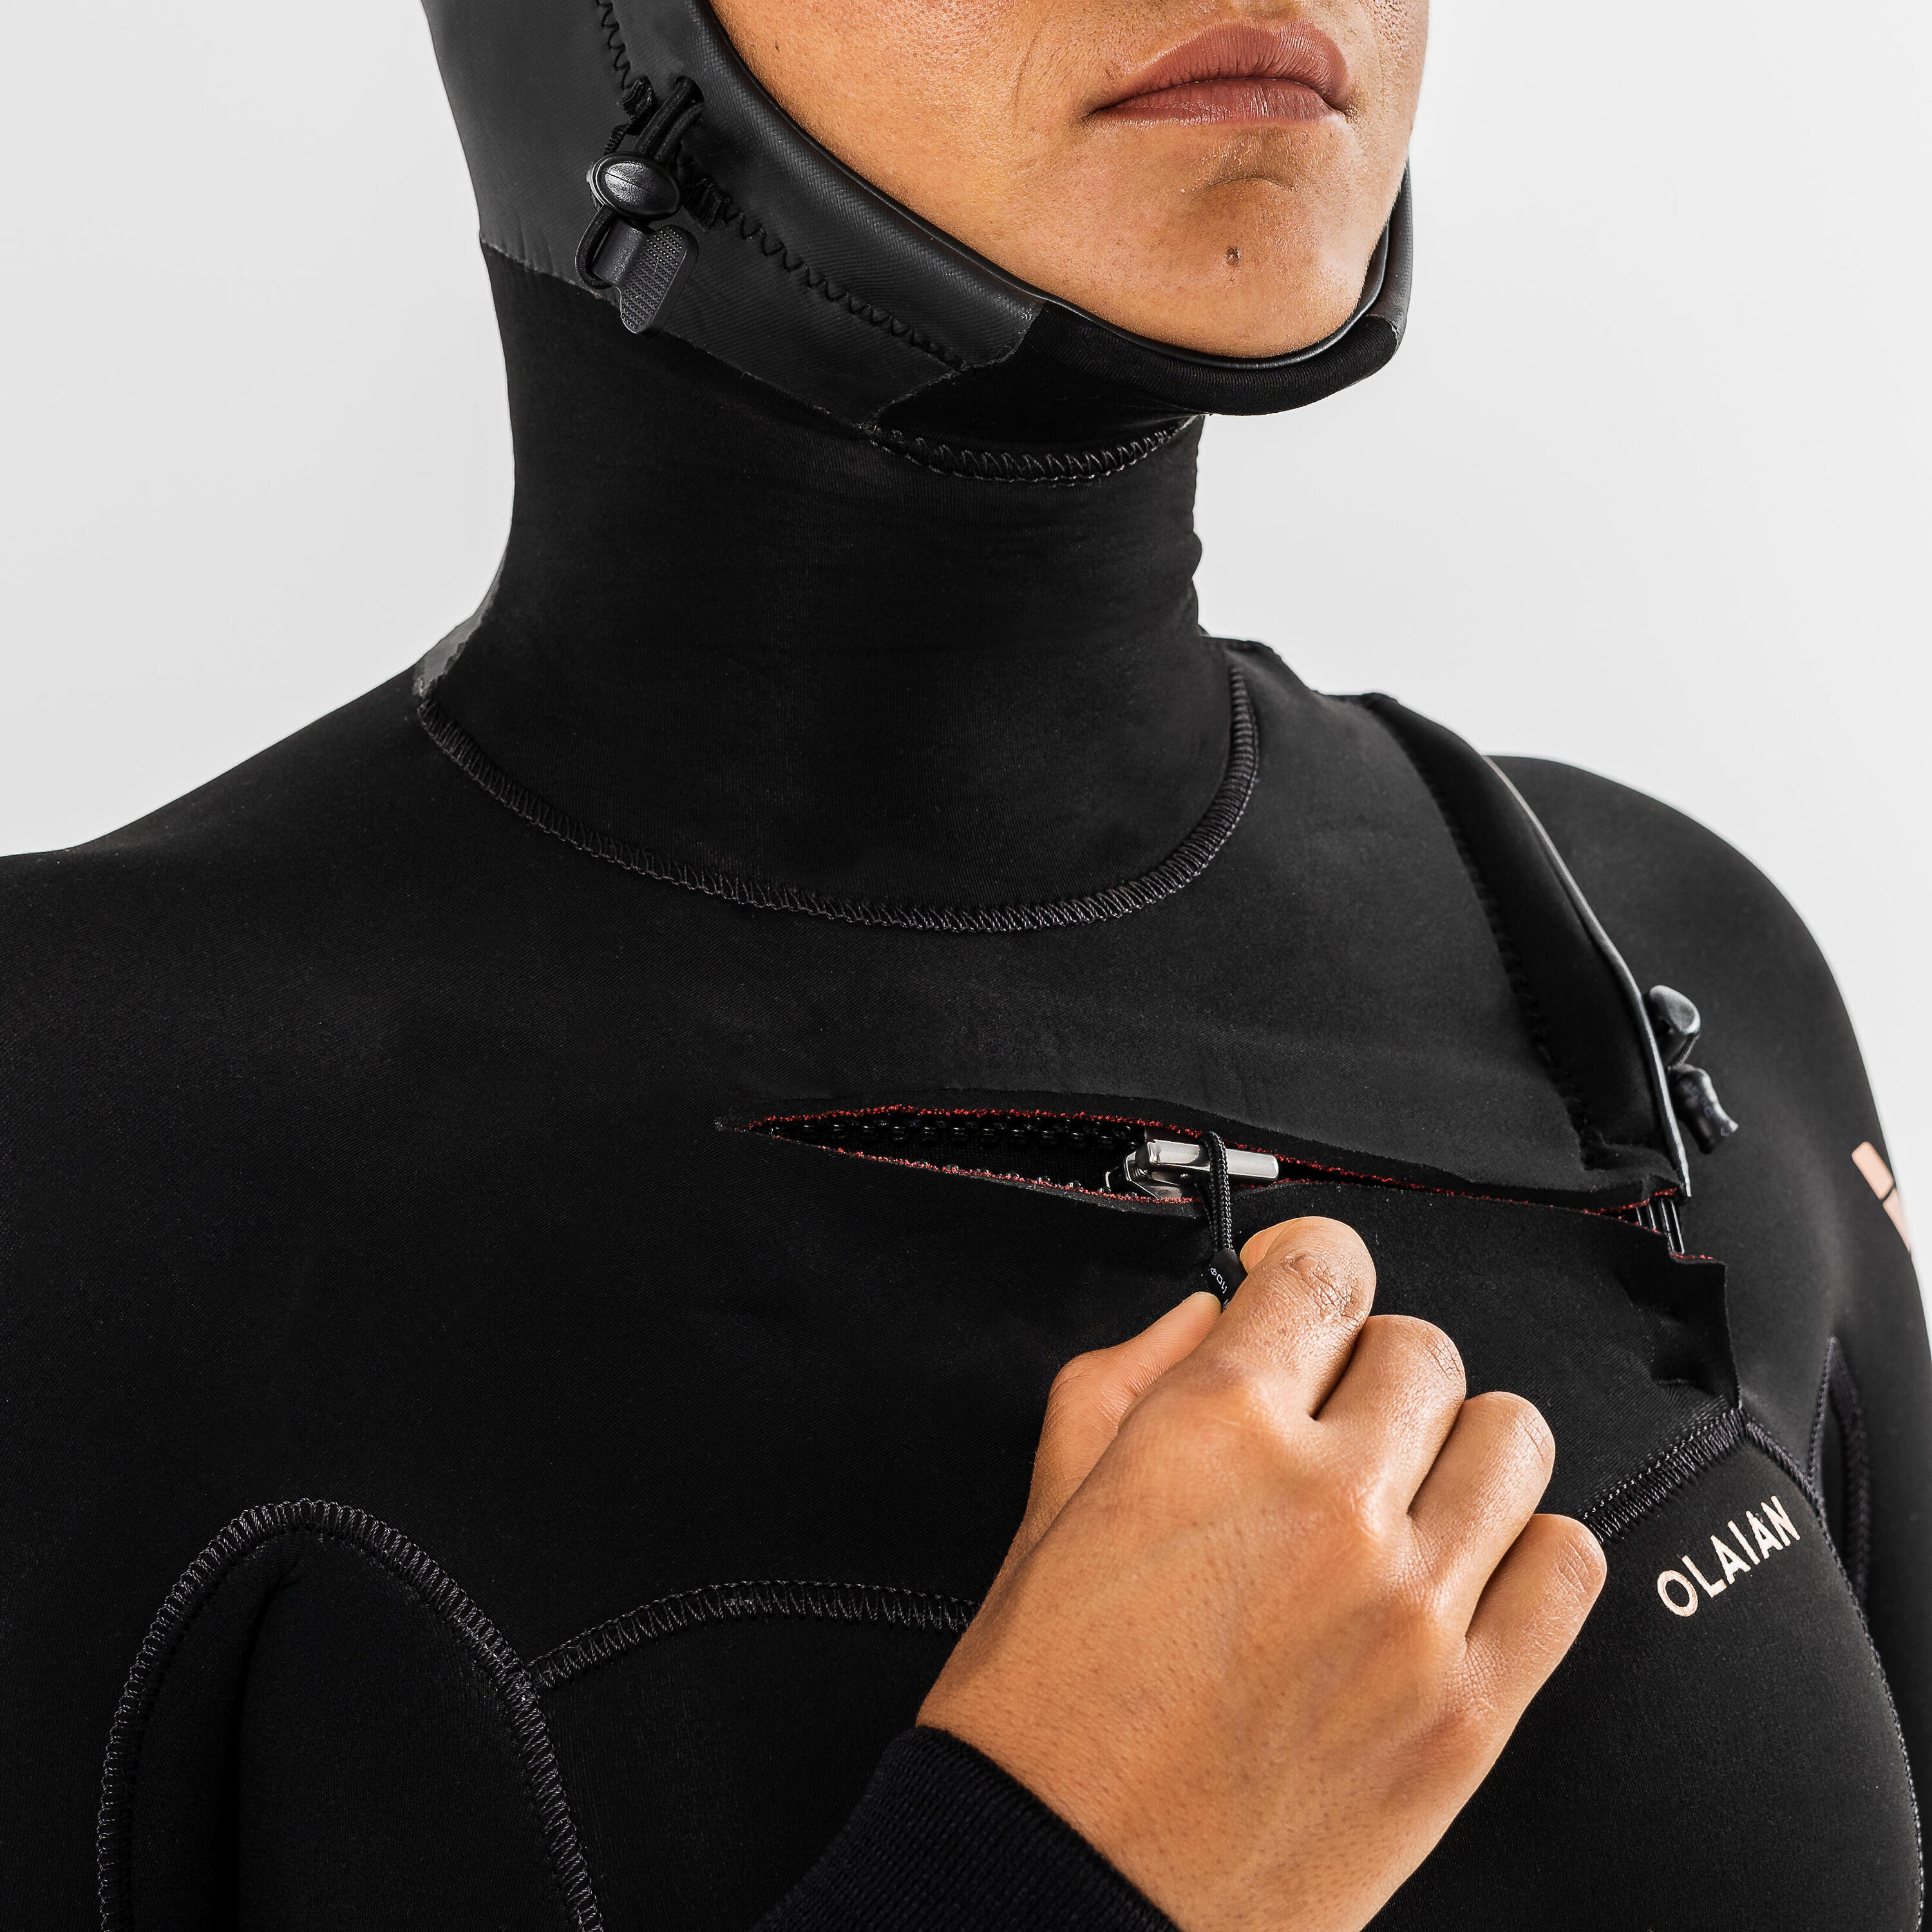 Women's Advanced Surfing 5/4 Neoprene Diving Suit with Hood and Chest Zip  4/13